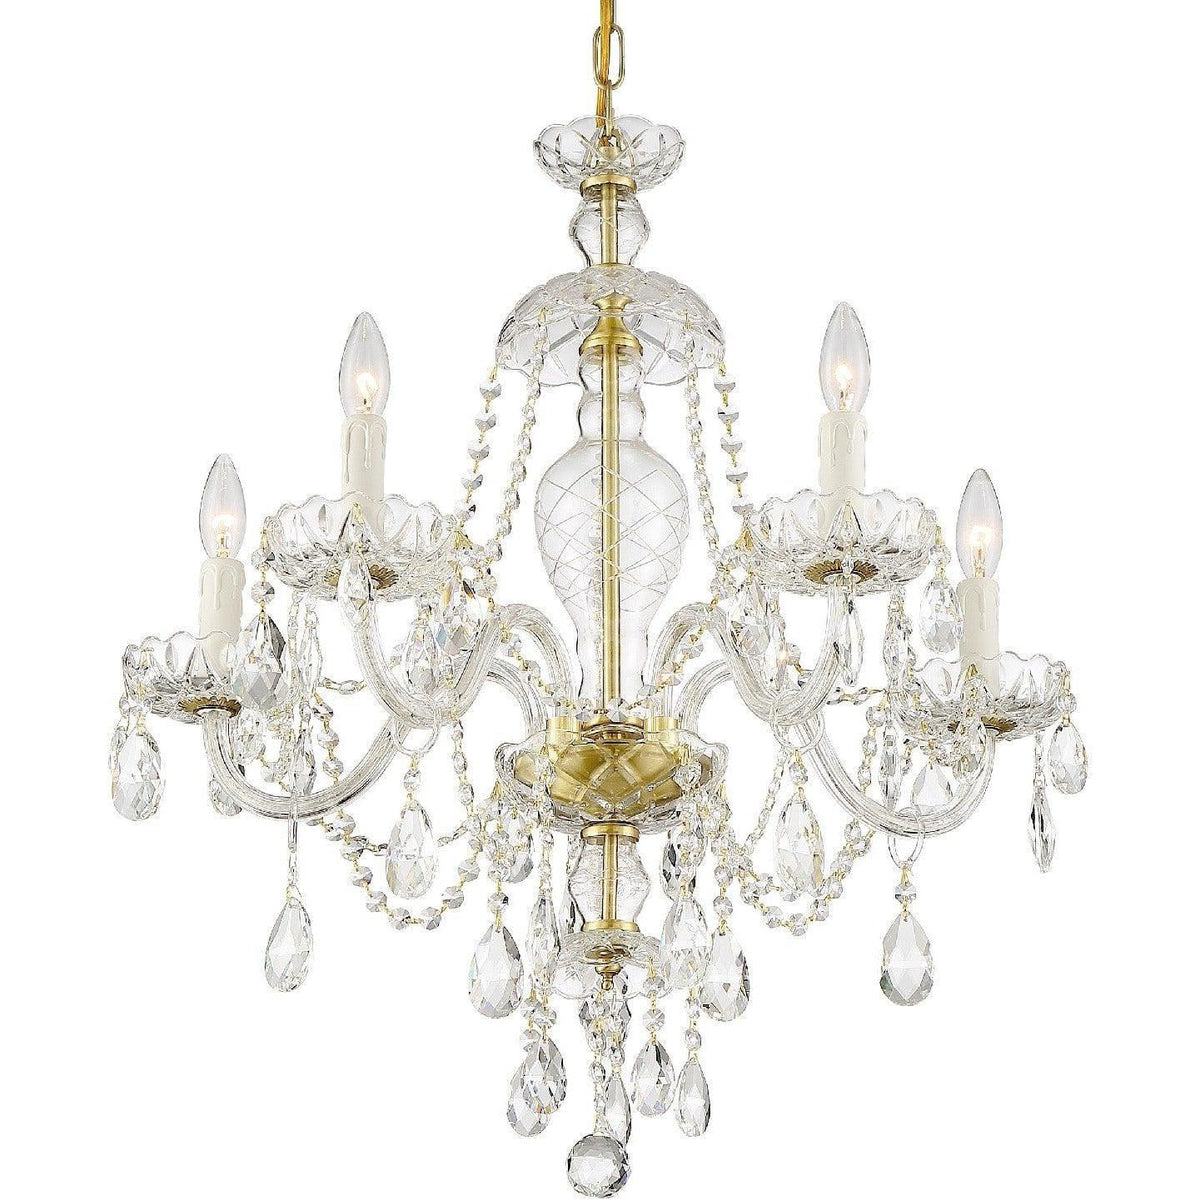 Crystorama - Candace Five Light Chandelier - CAN-A1305-PB-CL-S | Montreal Lighting & Hardware